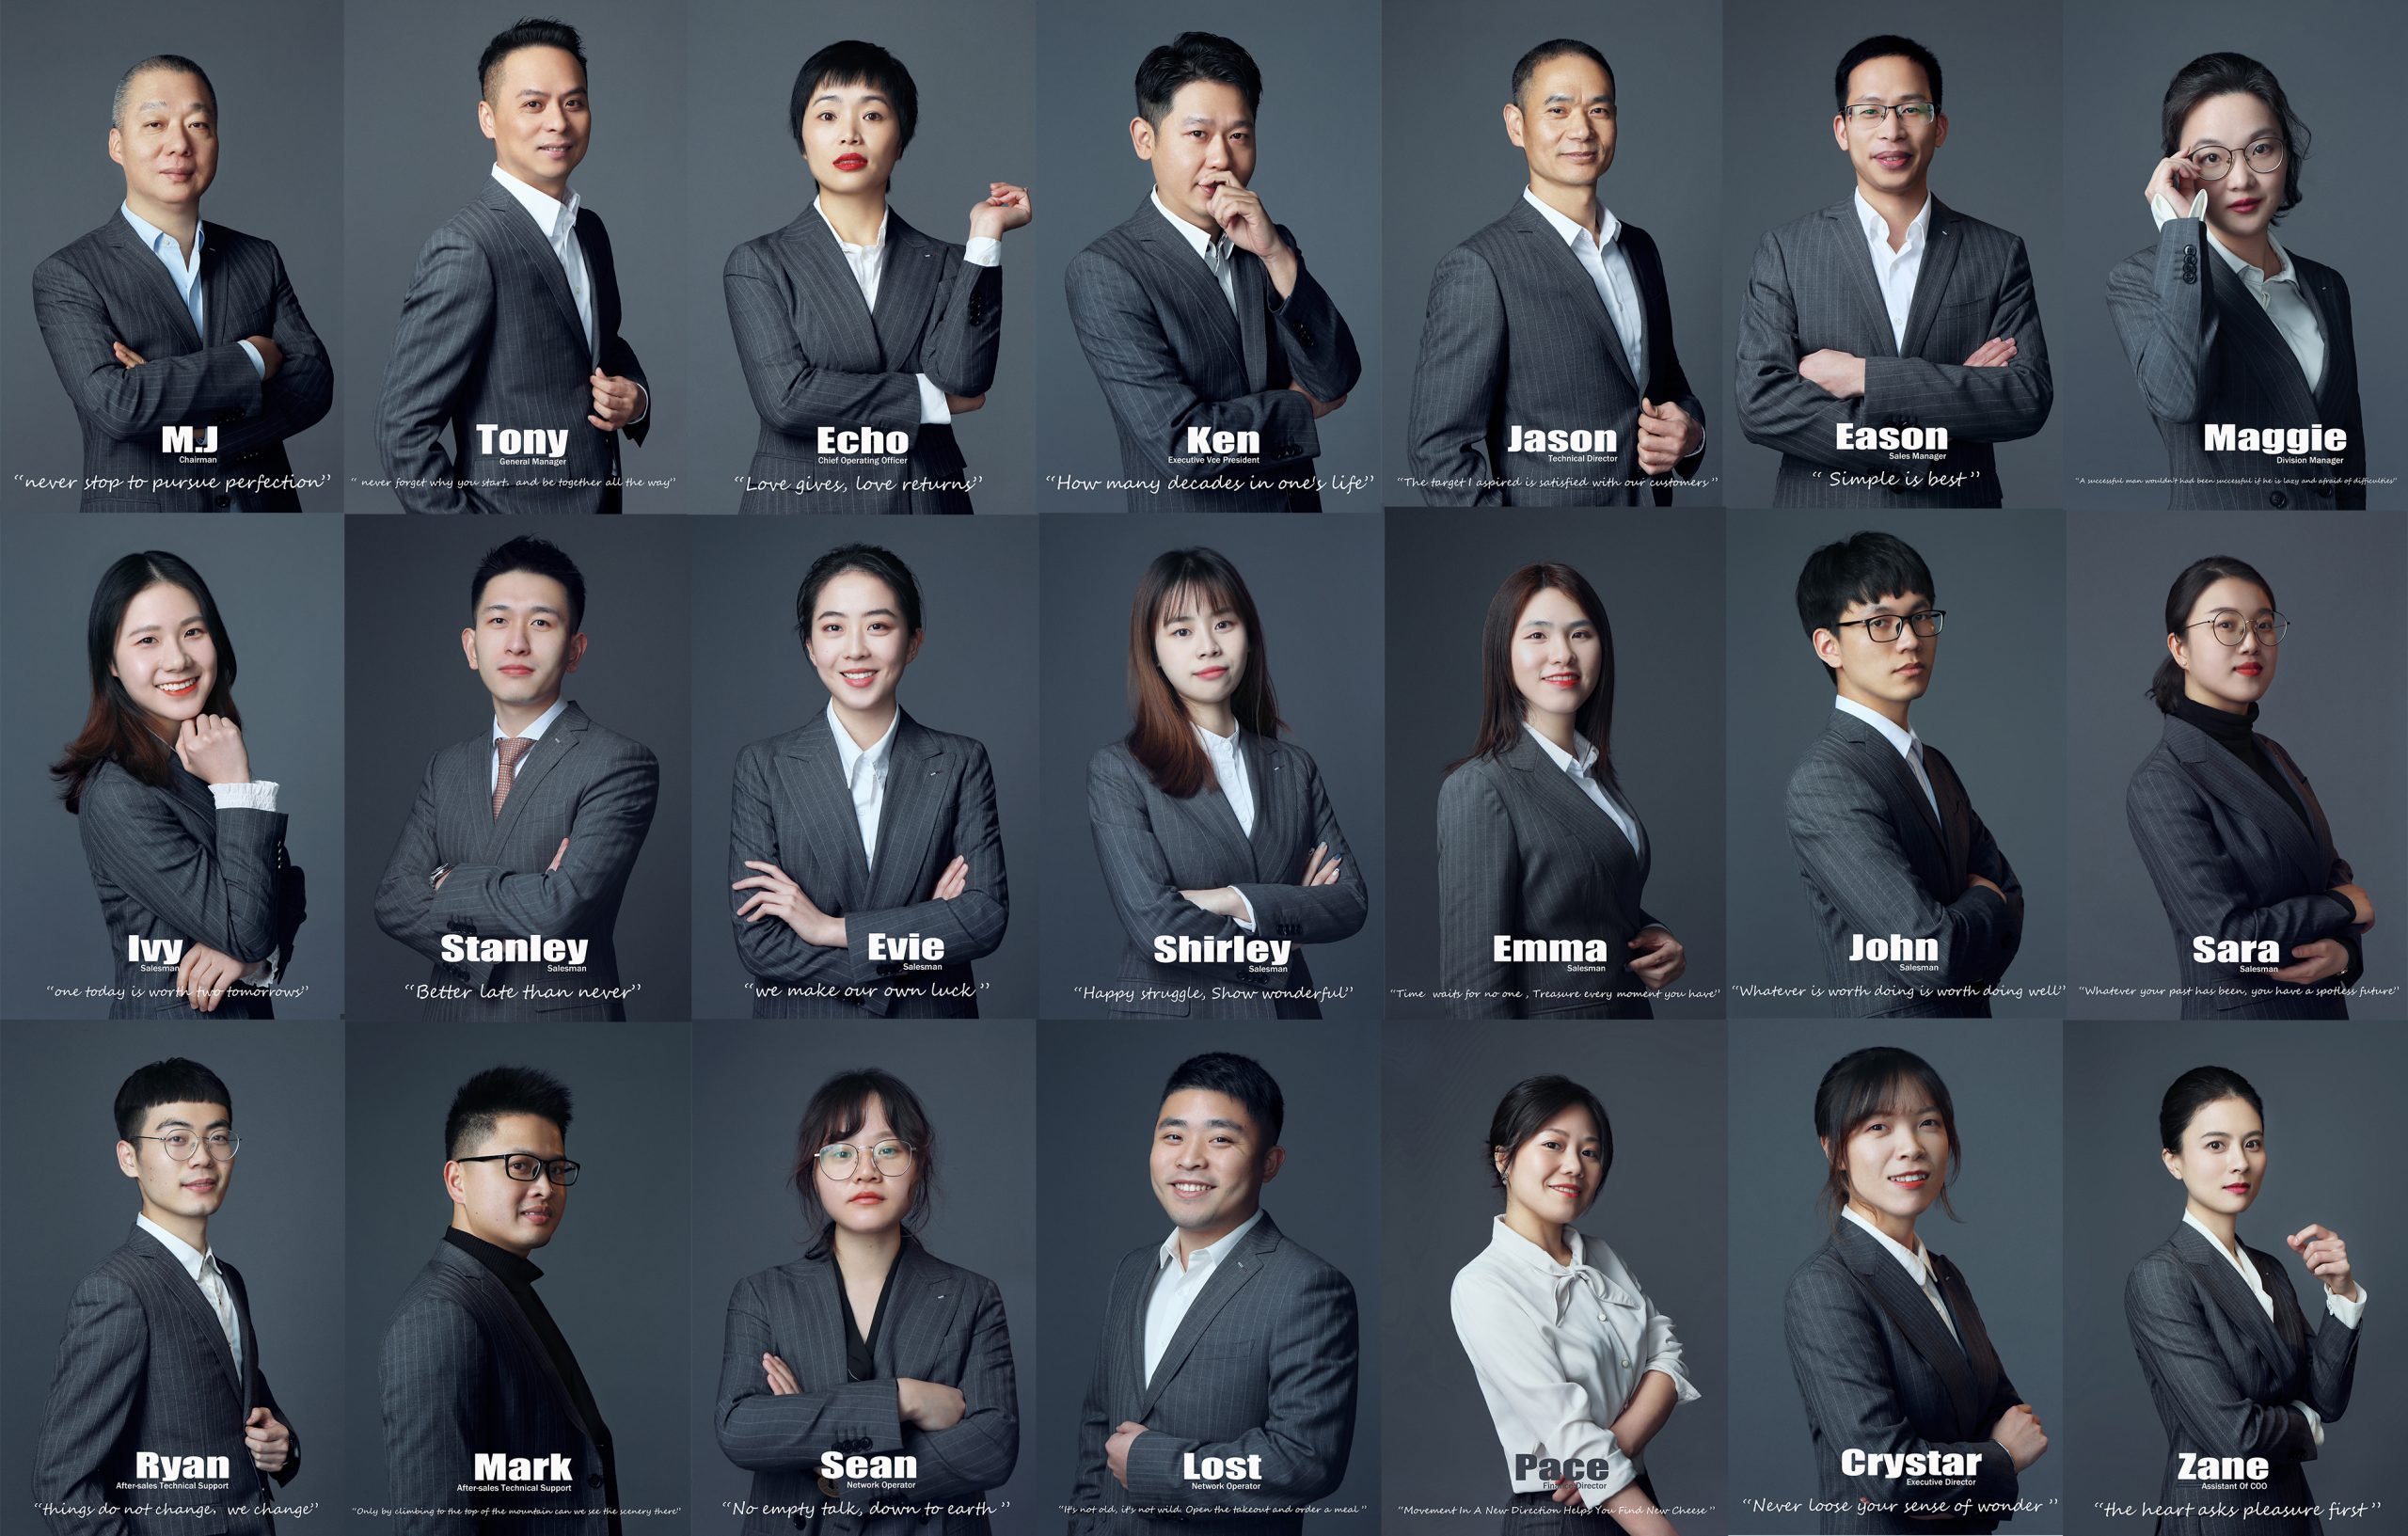 our sales team